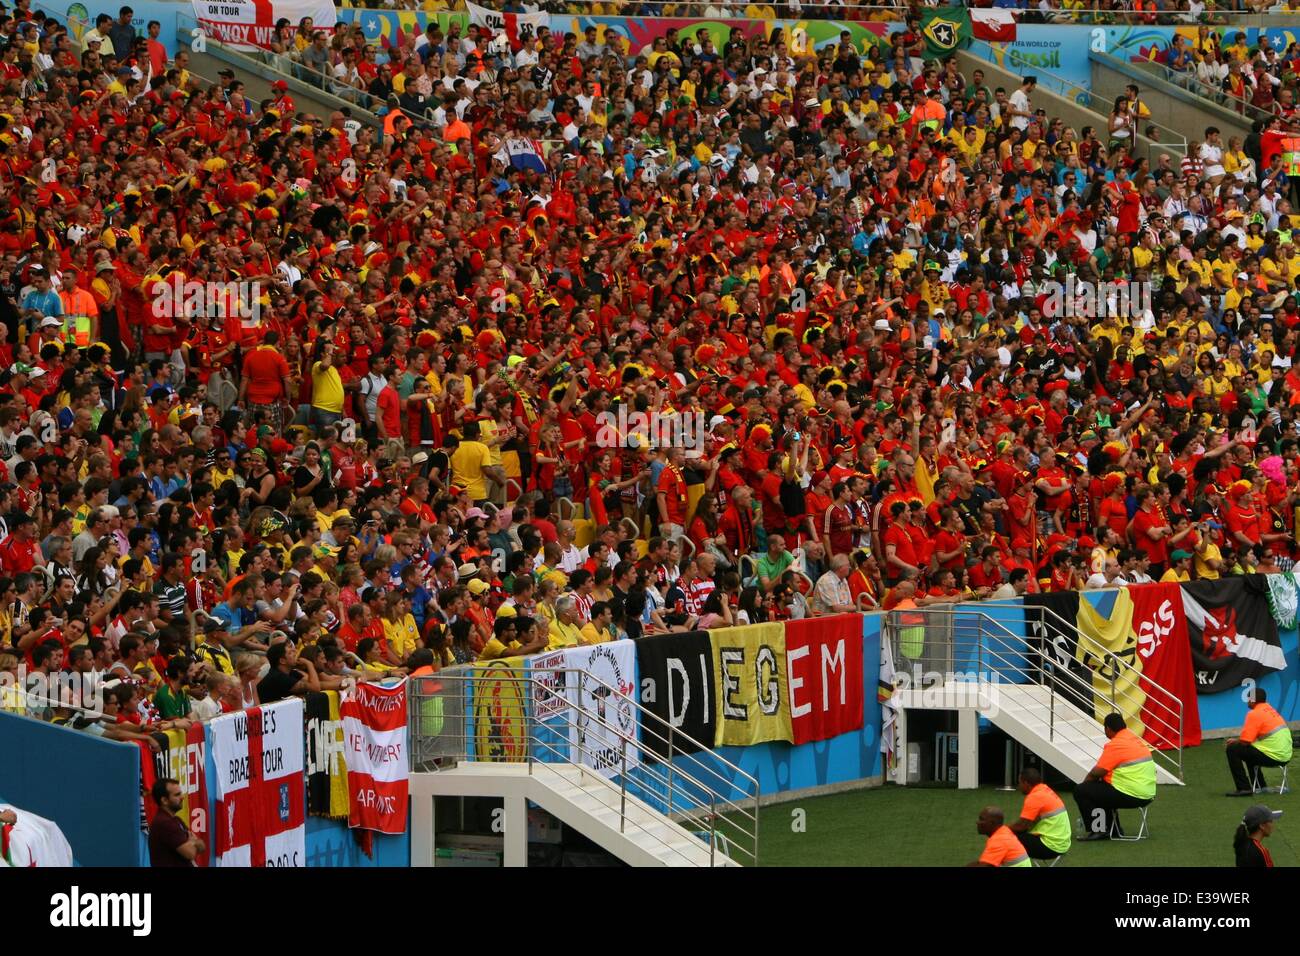 Rio de Janeiro, Brazil. 22nd June, 2014. 2014 FIFA World Cup Brazil. A colorful pack of Belgian fans at Maracanã to watch the match between Belgium and Russia. Belgium won 1-0, thus qualifying for the round of 16. Rio de Janeiro, Brazil, 22nd June, 2014. Credit:  Maria Adelaide Silva/Alamy Live News Stock Photo